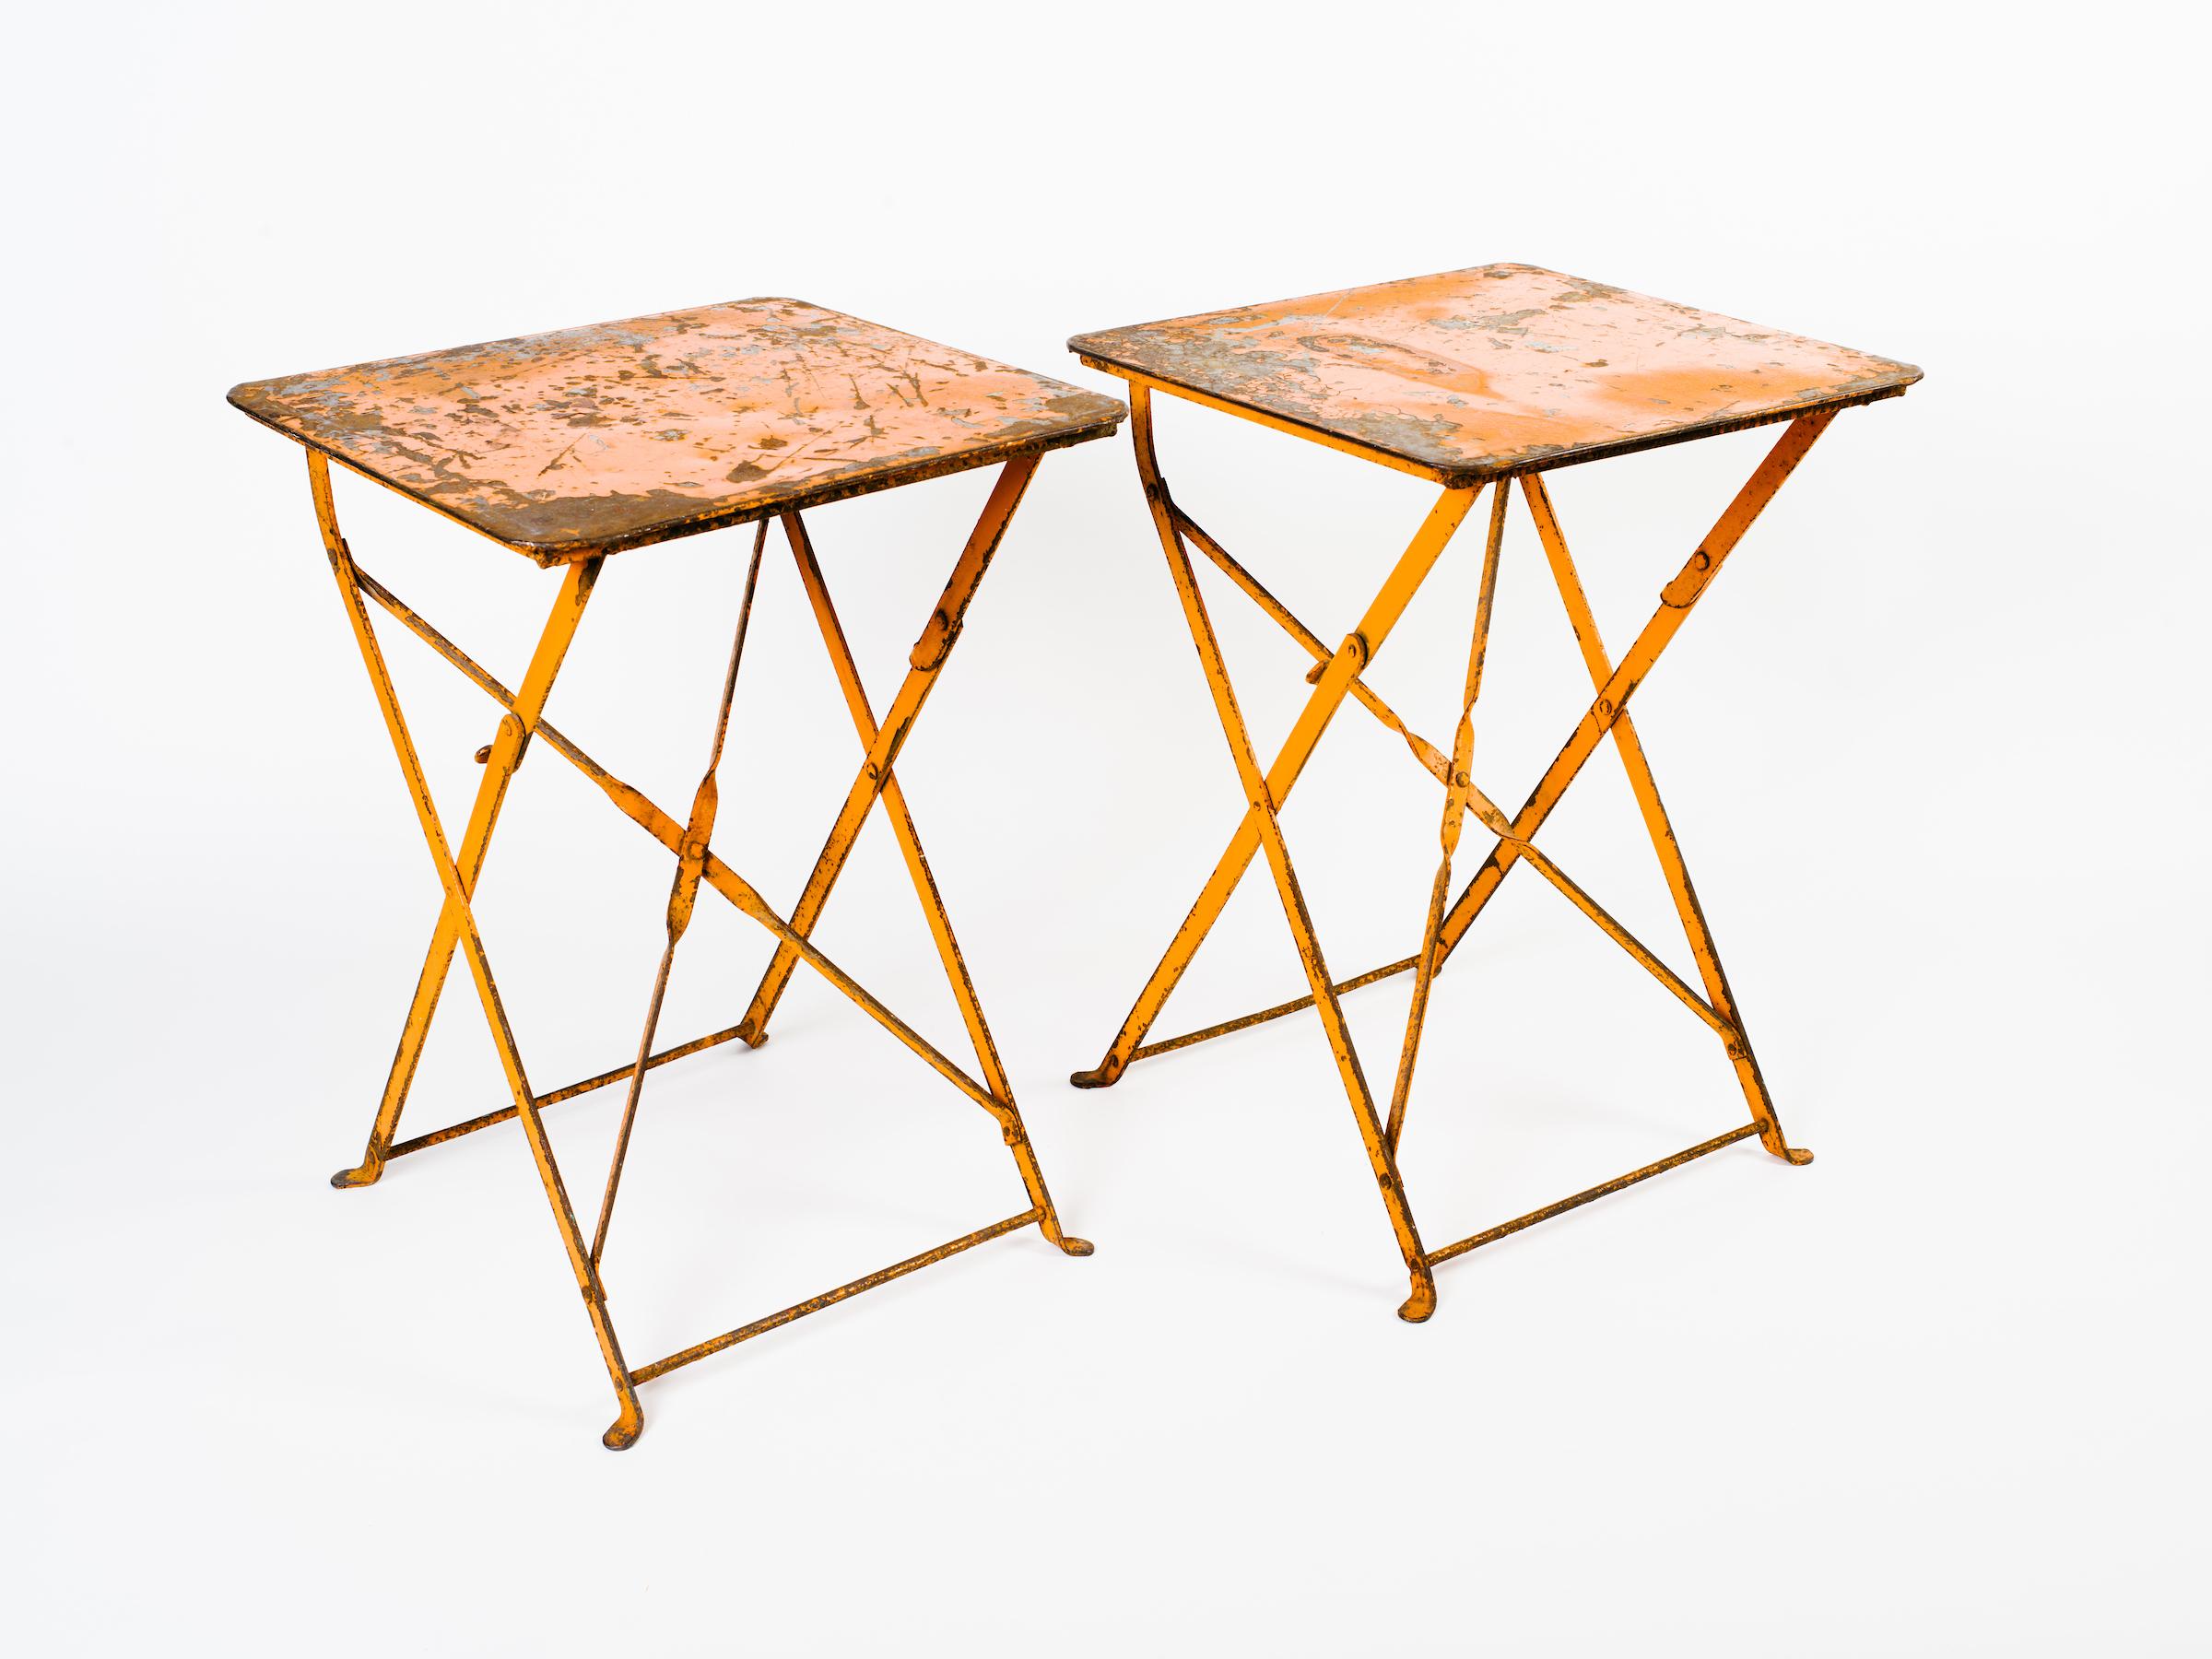 Pair of 1930s industrial French folding iron bistro tables with beautiful patina on the metal and original orange paint. Exhibits wear on the paint throughout, adding to their rustic charm and beauty. Can be used indoors as side tables or outdoors